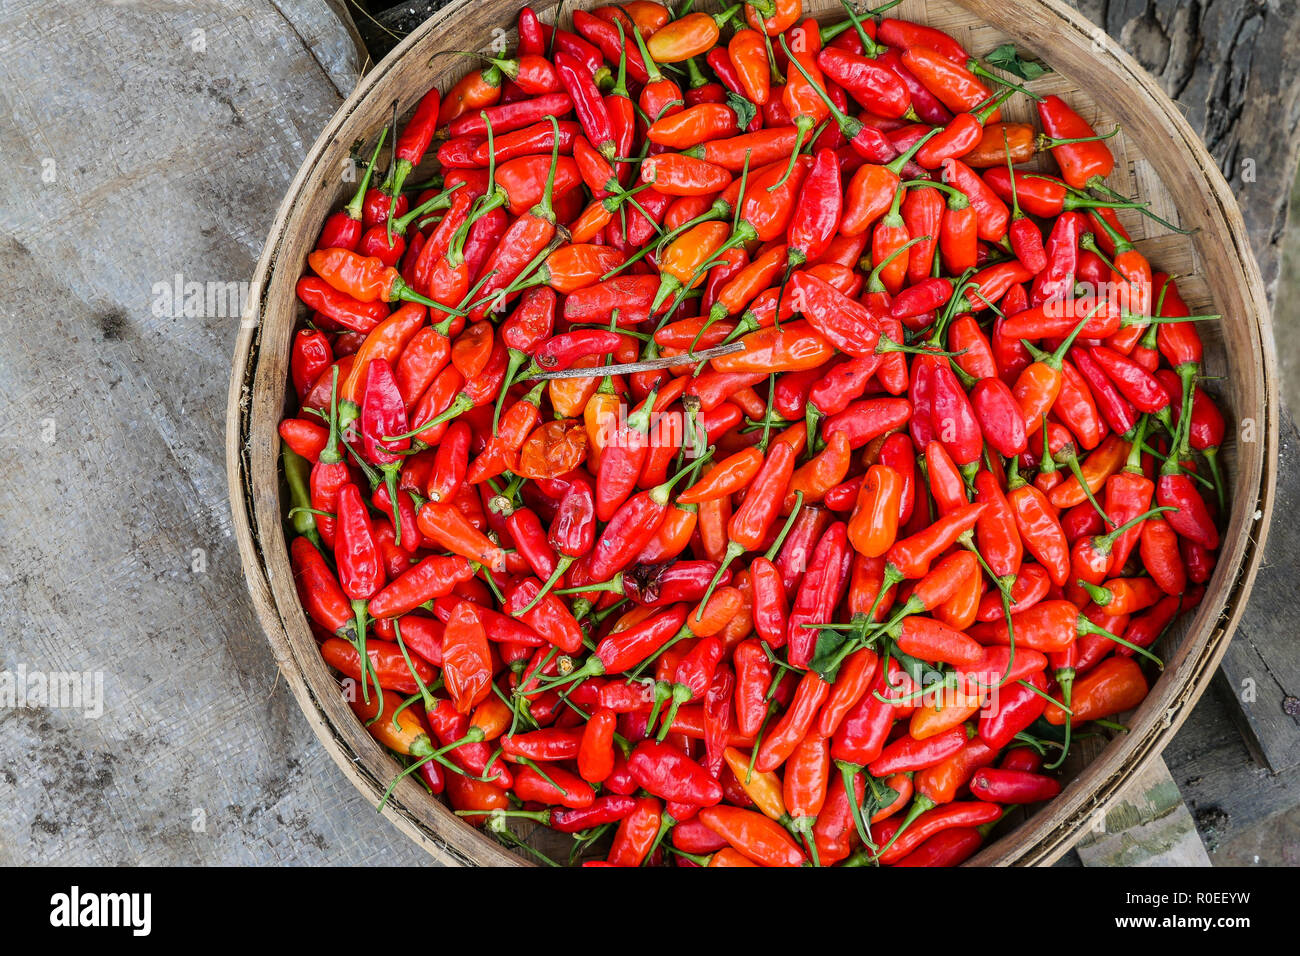 A wooden bowl filled with red chilis. Stock Photo